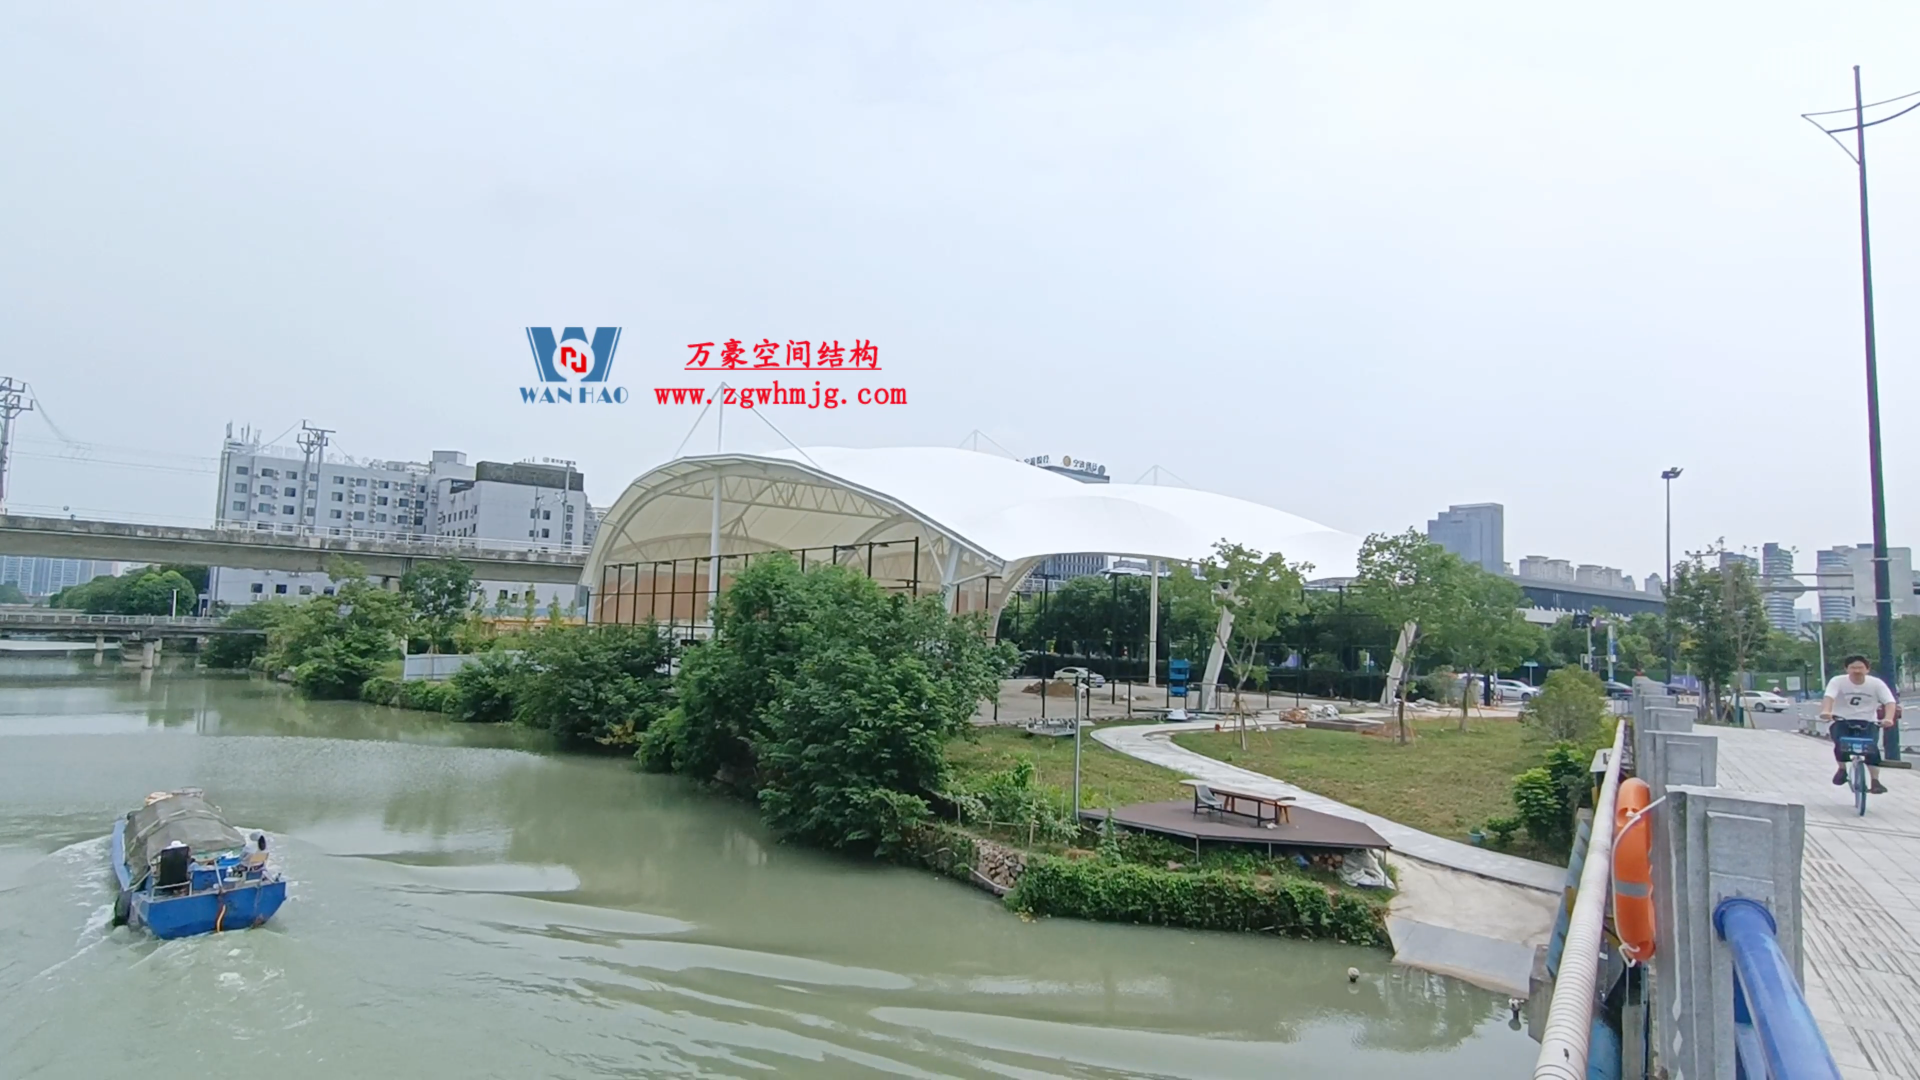 Appreciation of PTFE membrane structure of Greenbelt stadium on the west side of Huimin Road, Wenzhou